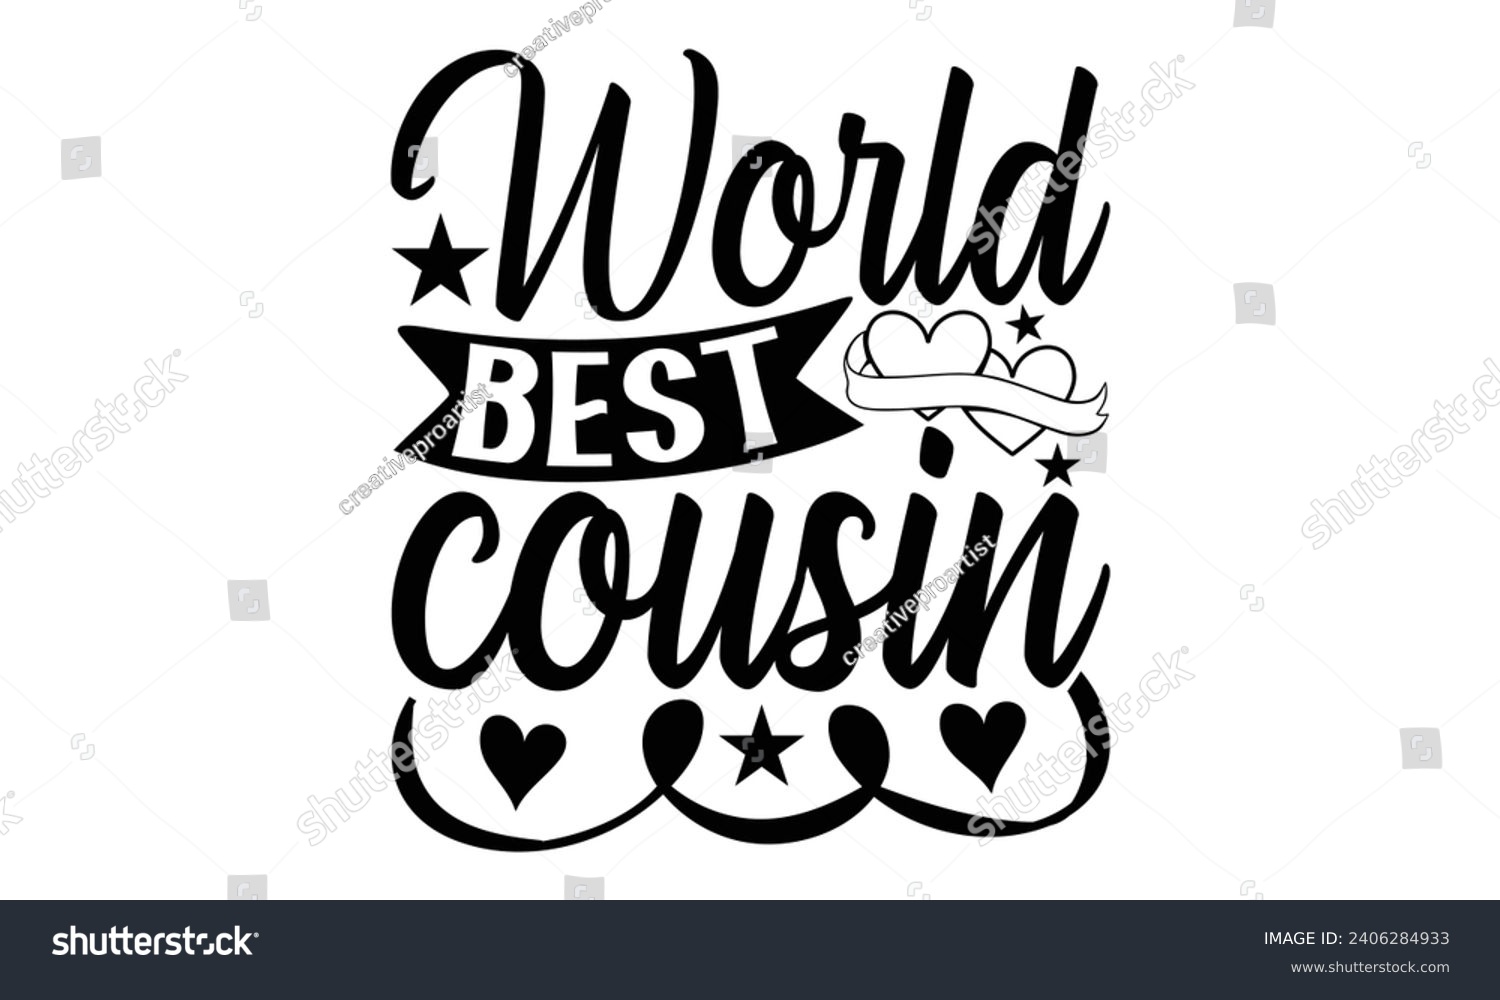 SVG of World Best Cousin- Best friends t- shirt design, Hand drawn lettering phrase, Illustration for prints on bags, posters, cards eps, Files for Cutting, Isolated on white background. svg